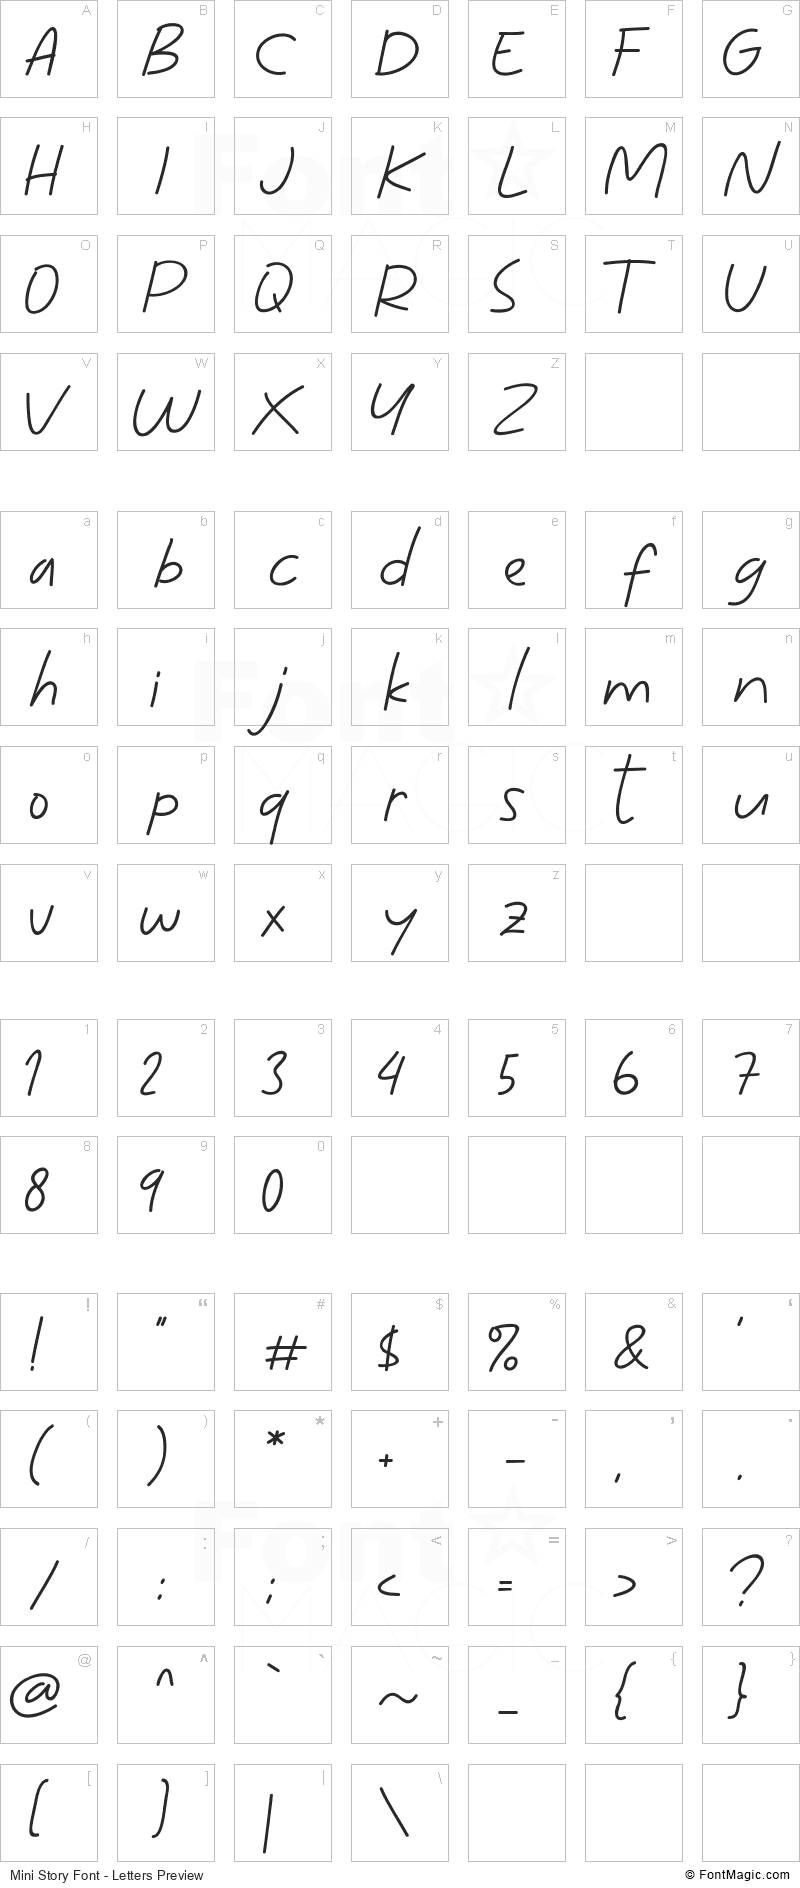 Mini Story Font - All Latters Preview Chart